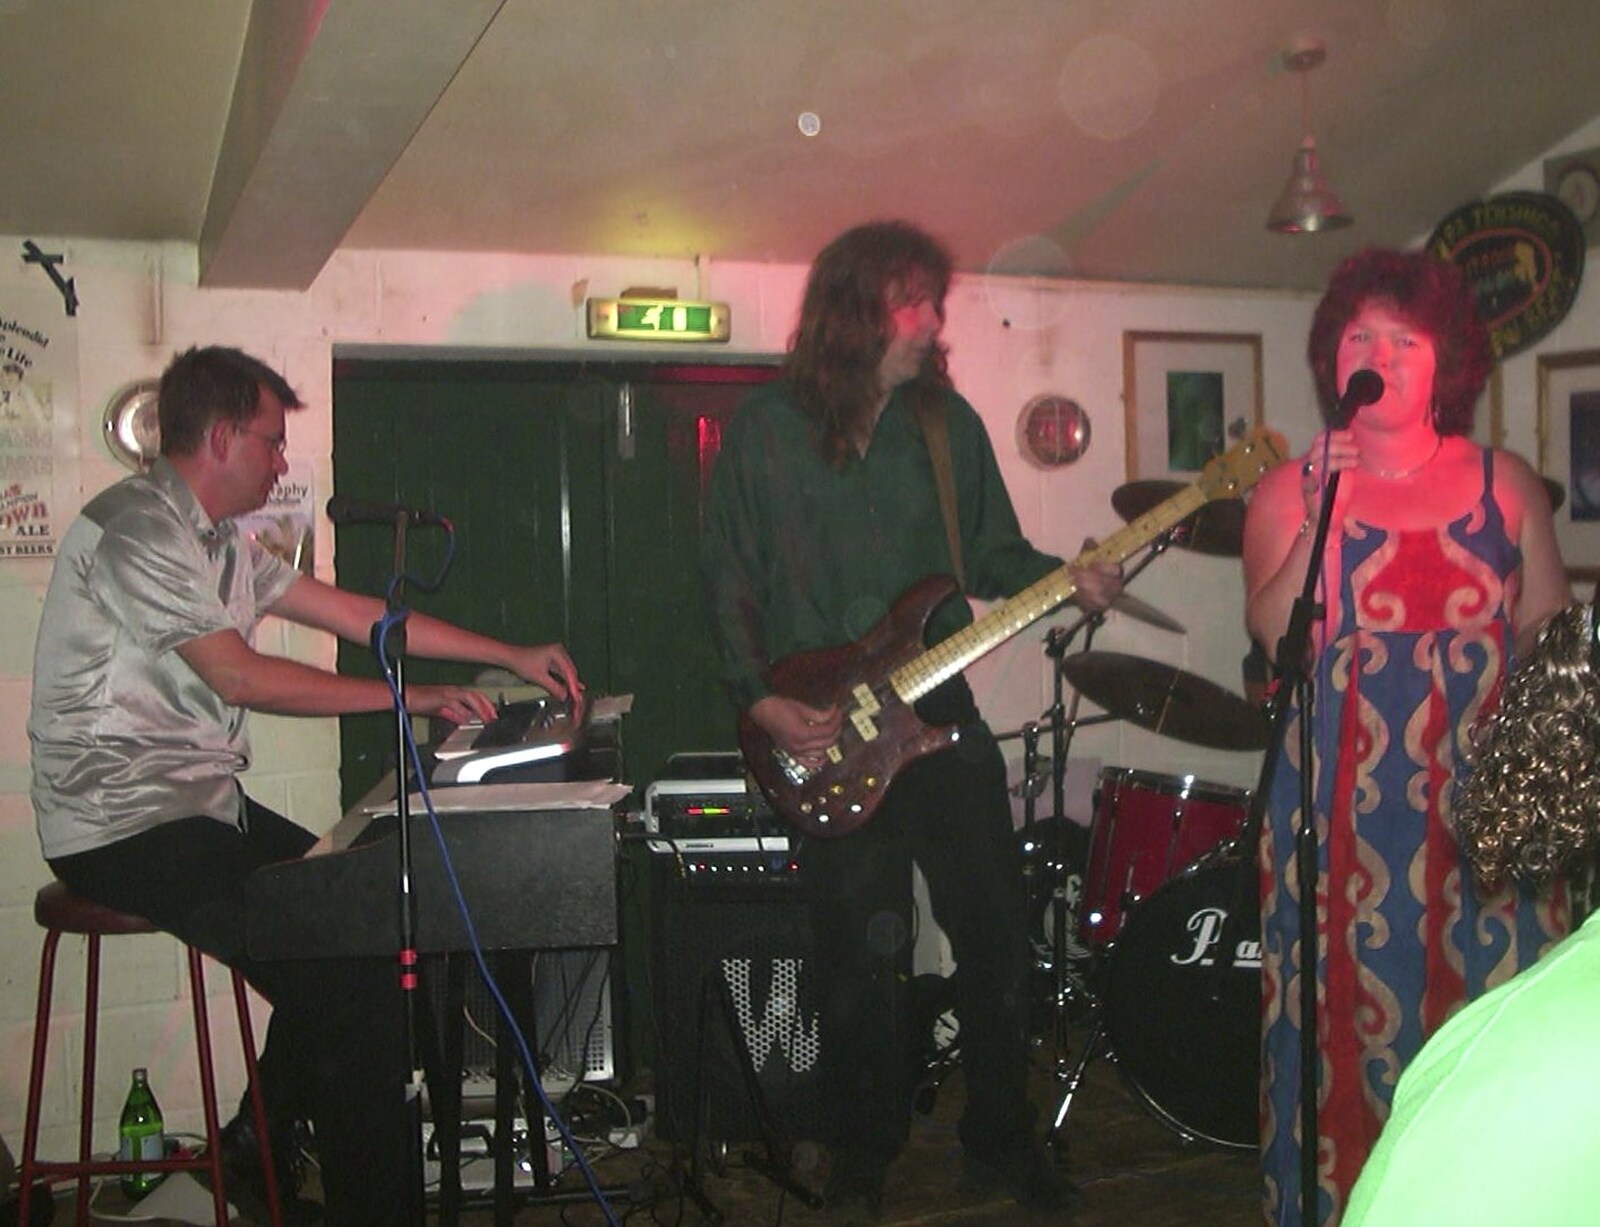 Nosher, Max and Jo in action from The BBs at the Cider Shed, Banham, Norfolk - 23rd June 2003